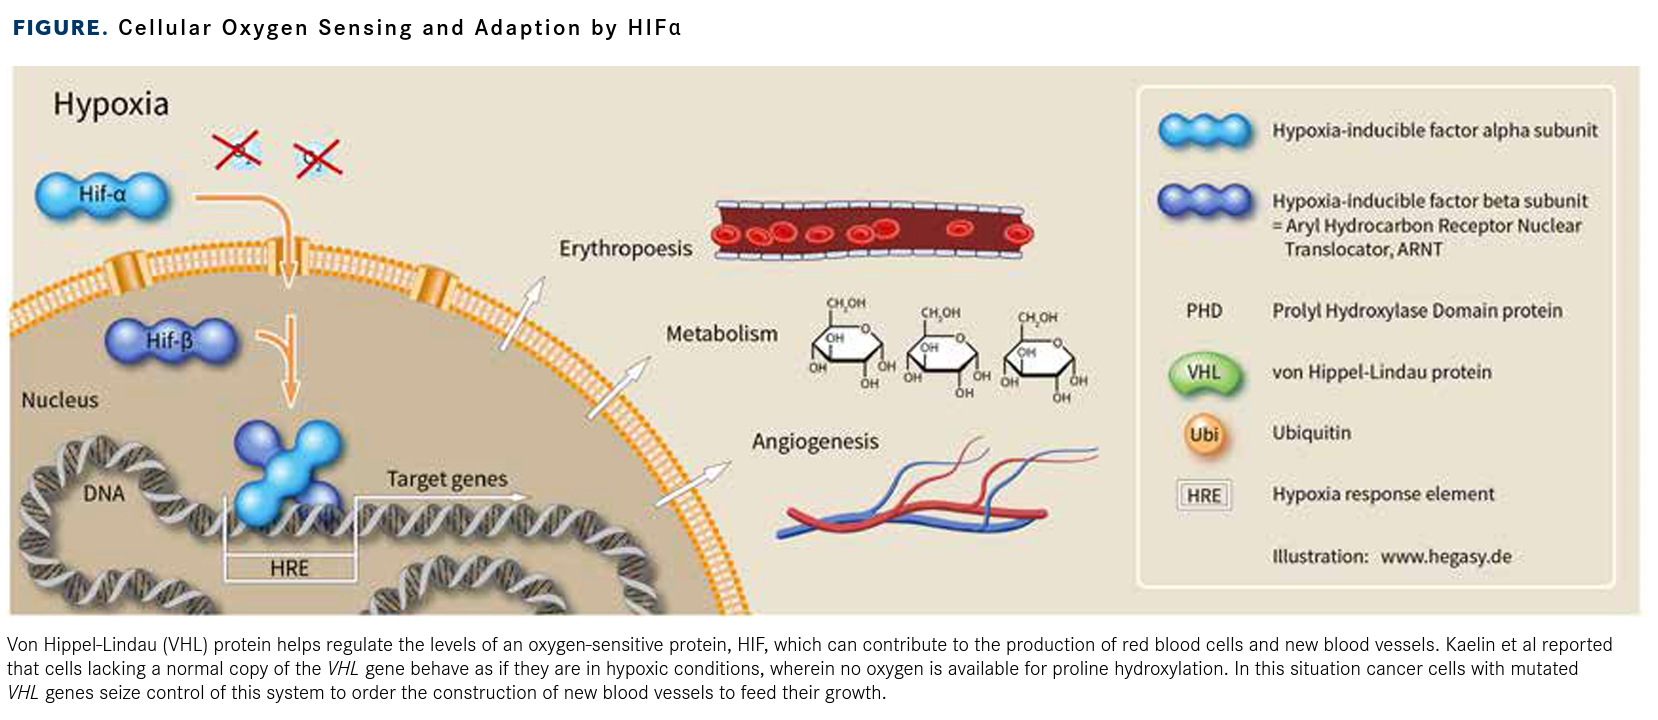 Cellular Oxygen Sensing and Adaption by HIFα